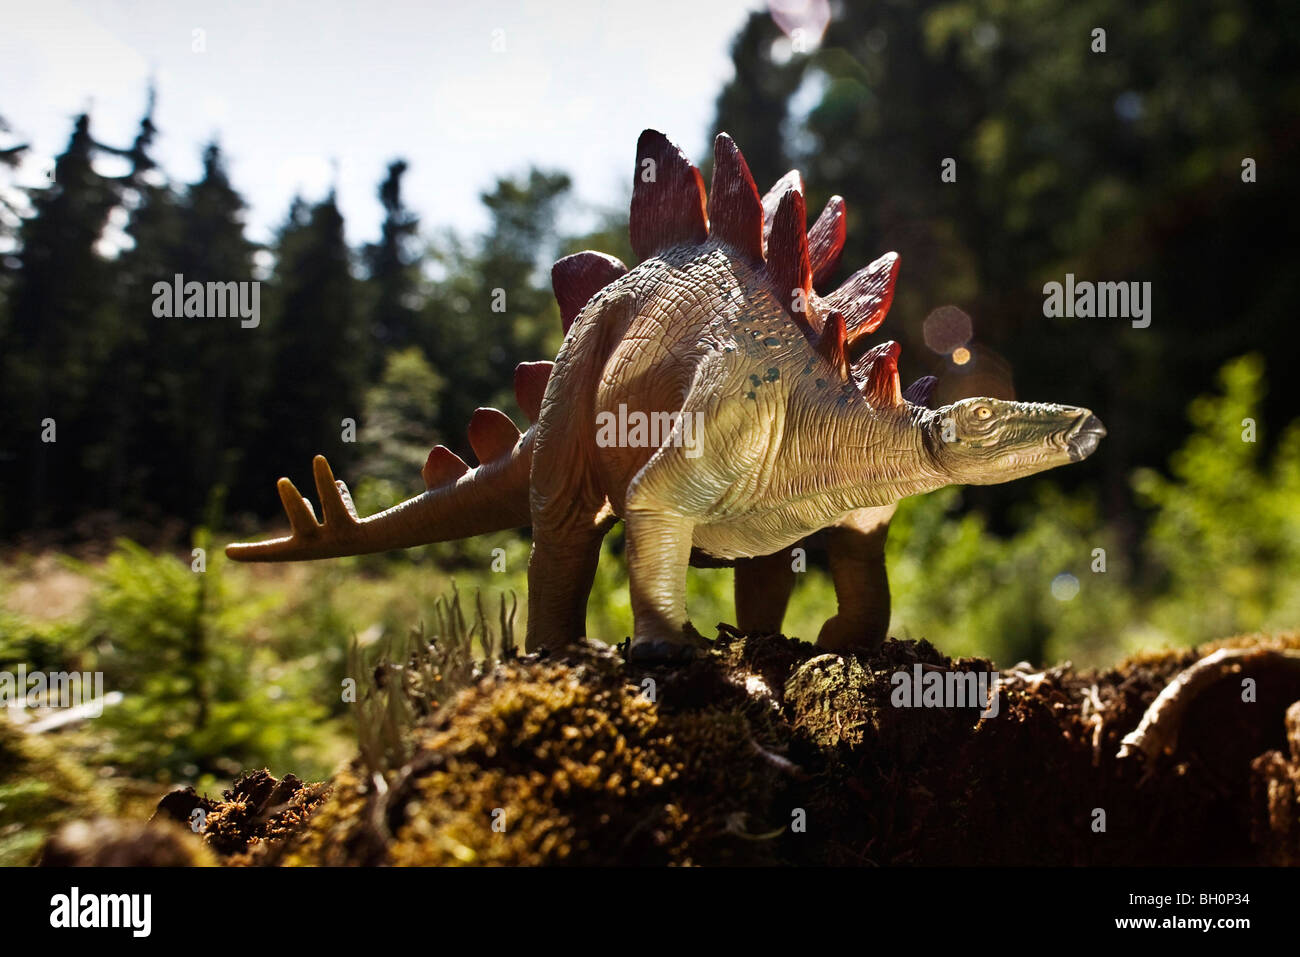 Toy stegosaurus at a clearing in front of conifers Stock Photo